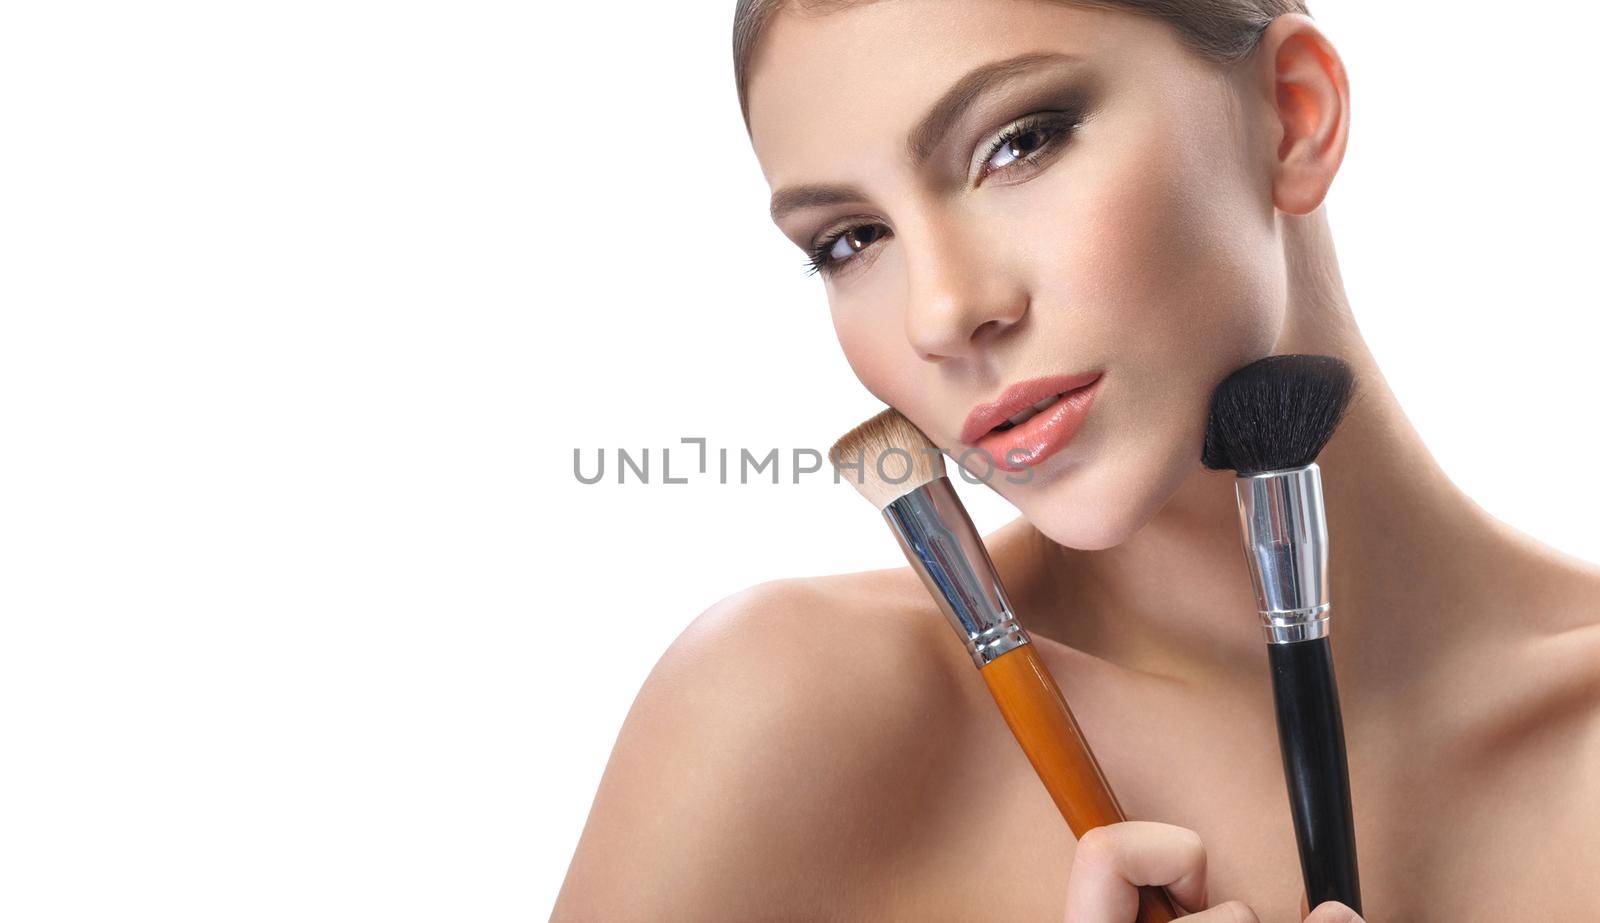 Beauty must haves. Horizontal shot of a beautiful young woman looking to the camera confidently holding makeup brushes to her face wearing professional makeup with brown smoky eyes and nude lipstick